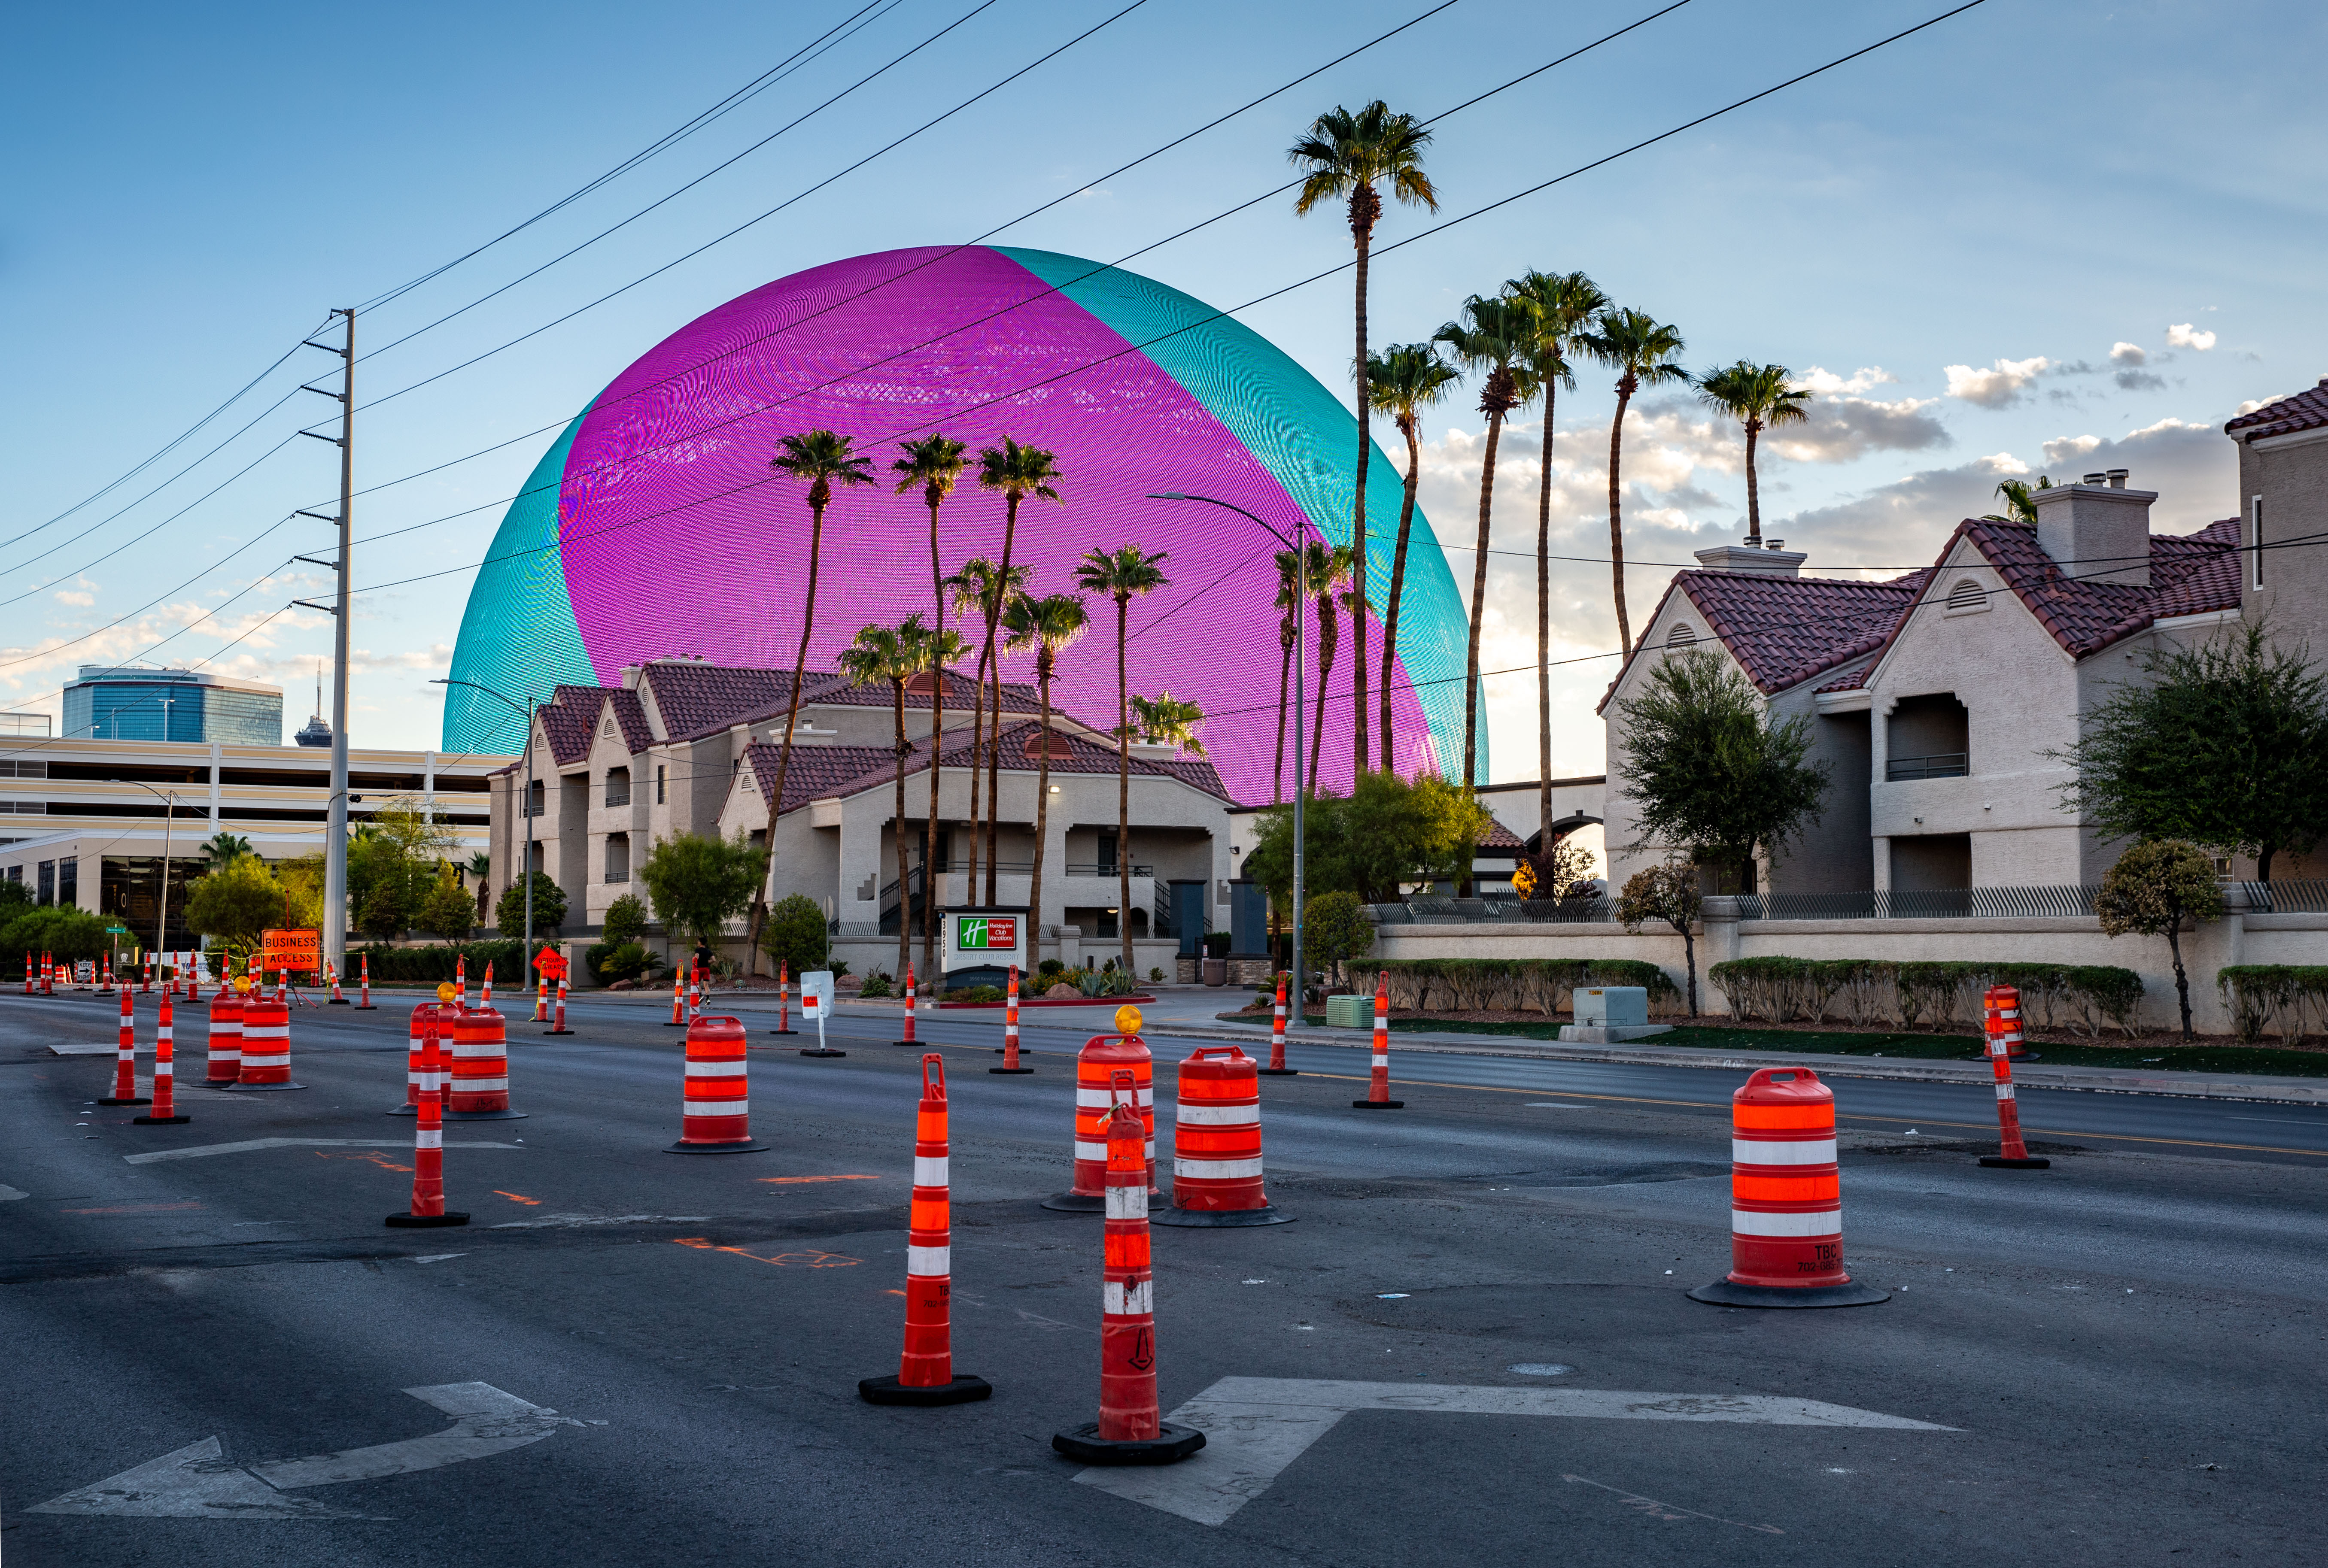 These photos of the Las Vegas Sphere are too cool to be true